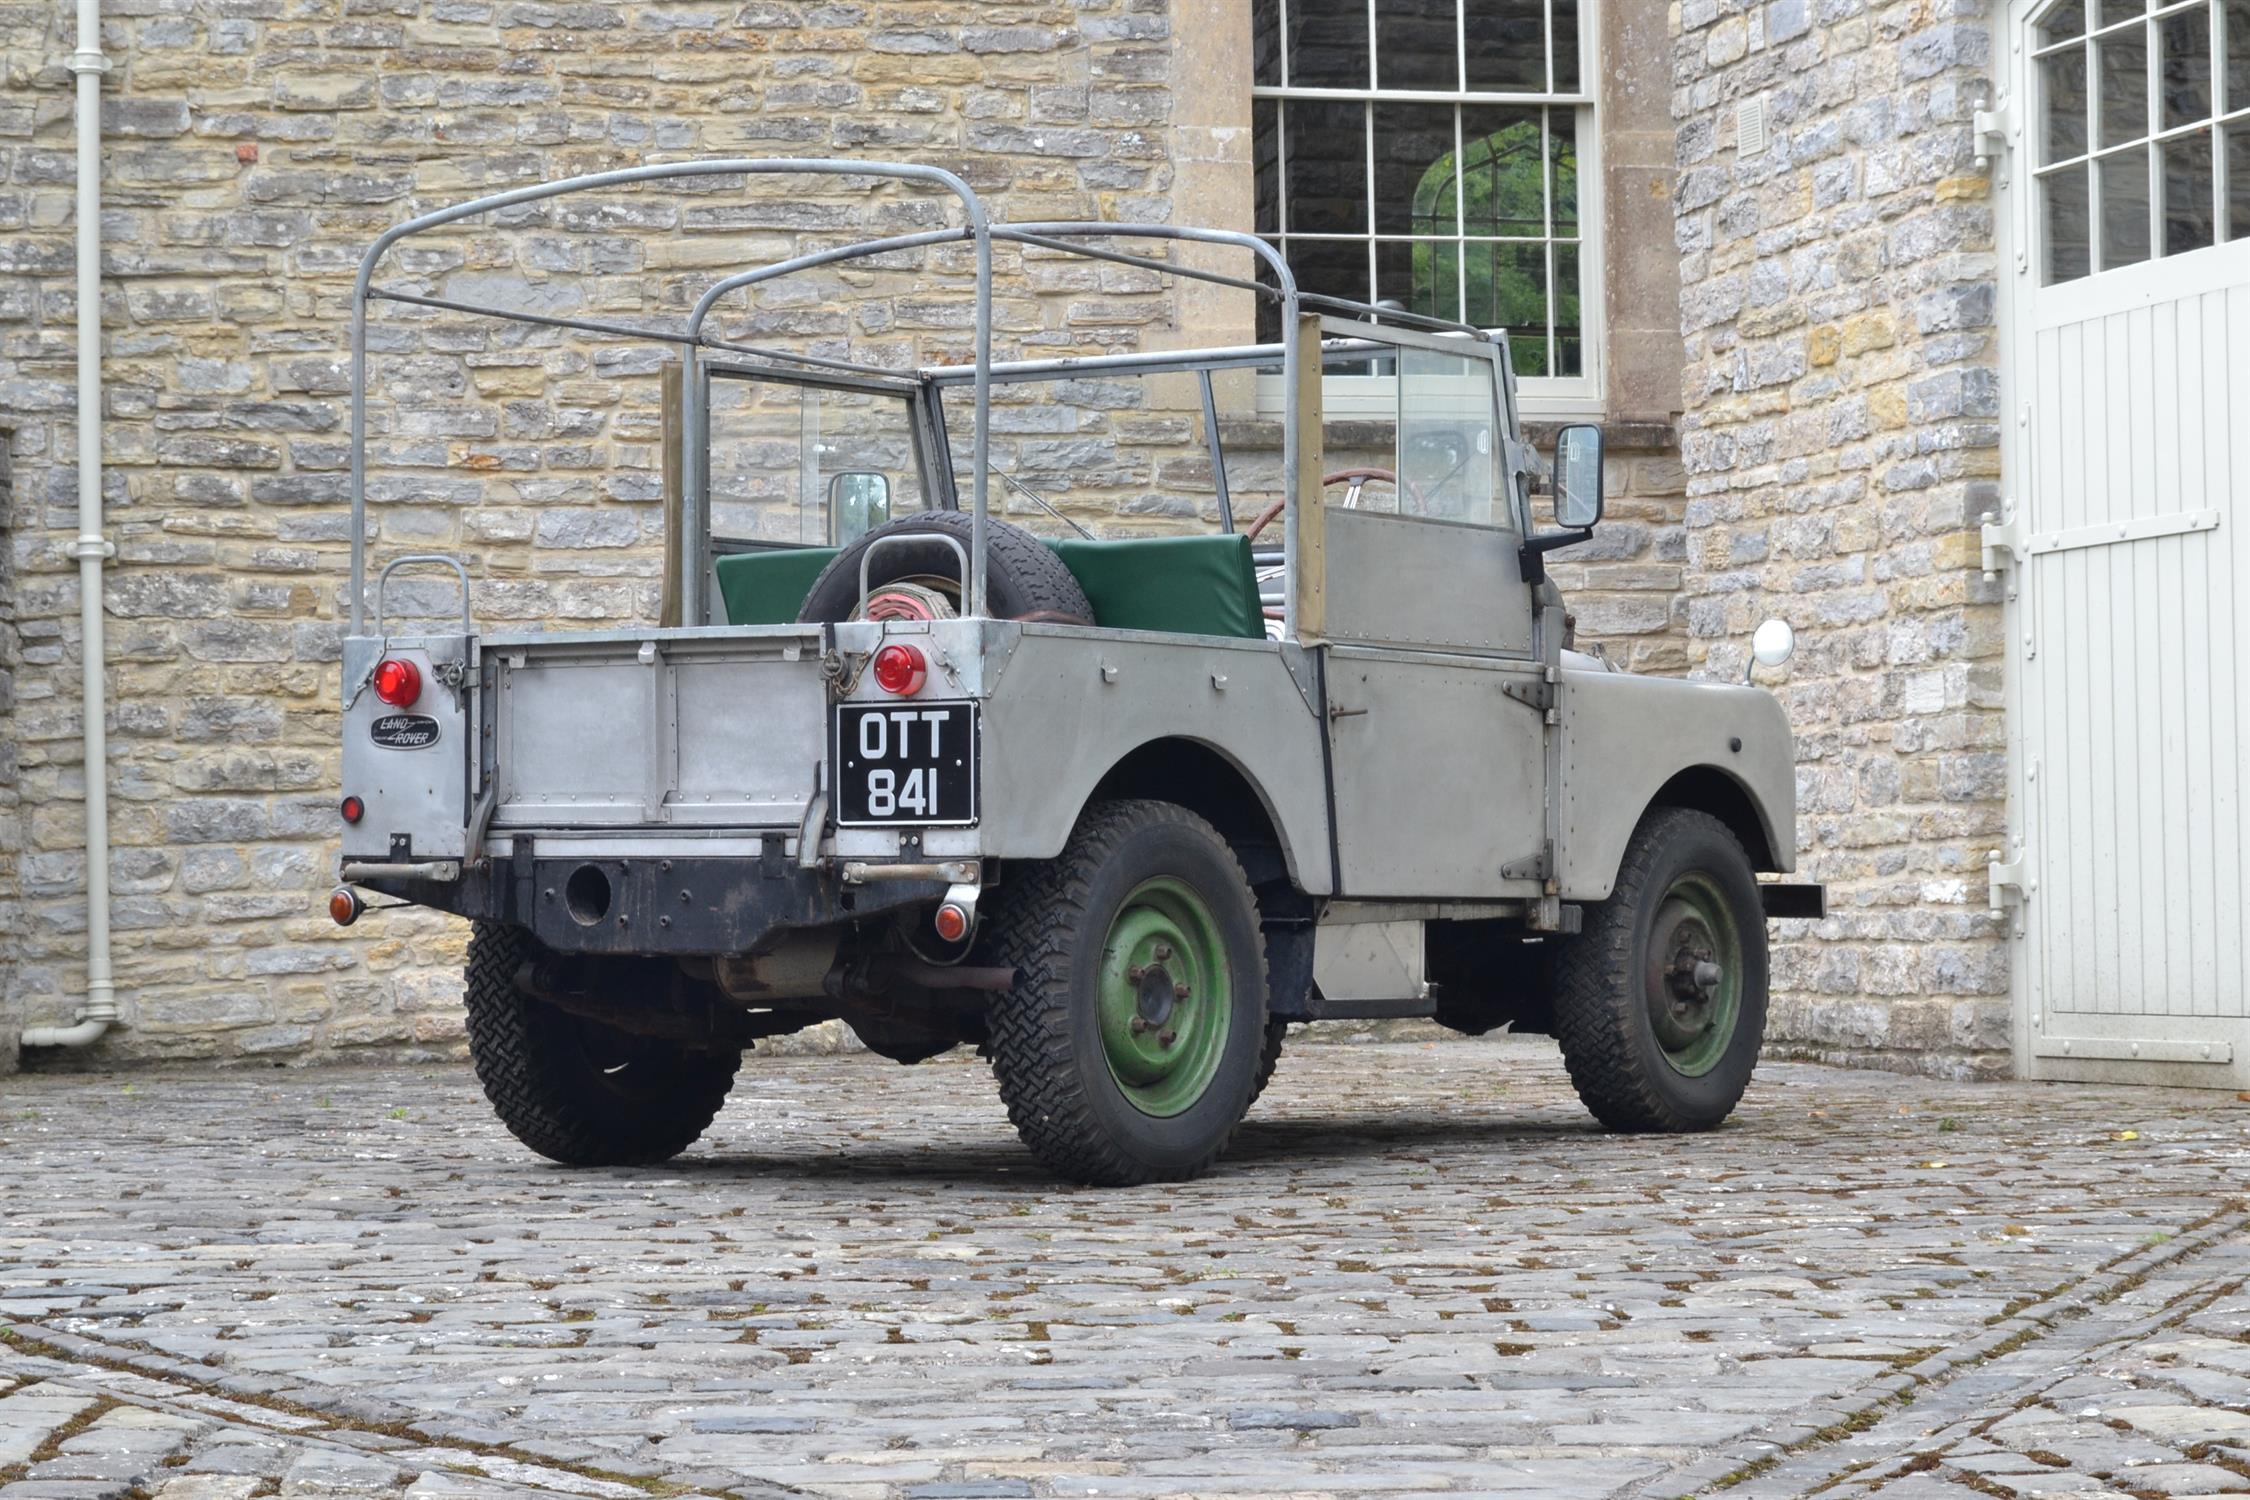 1953 Land Rover 80" Series I Pick-Up - Image 4 of 10